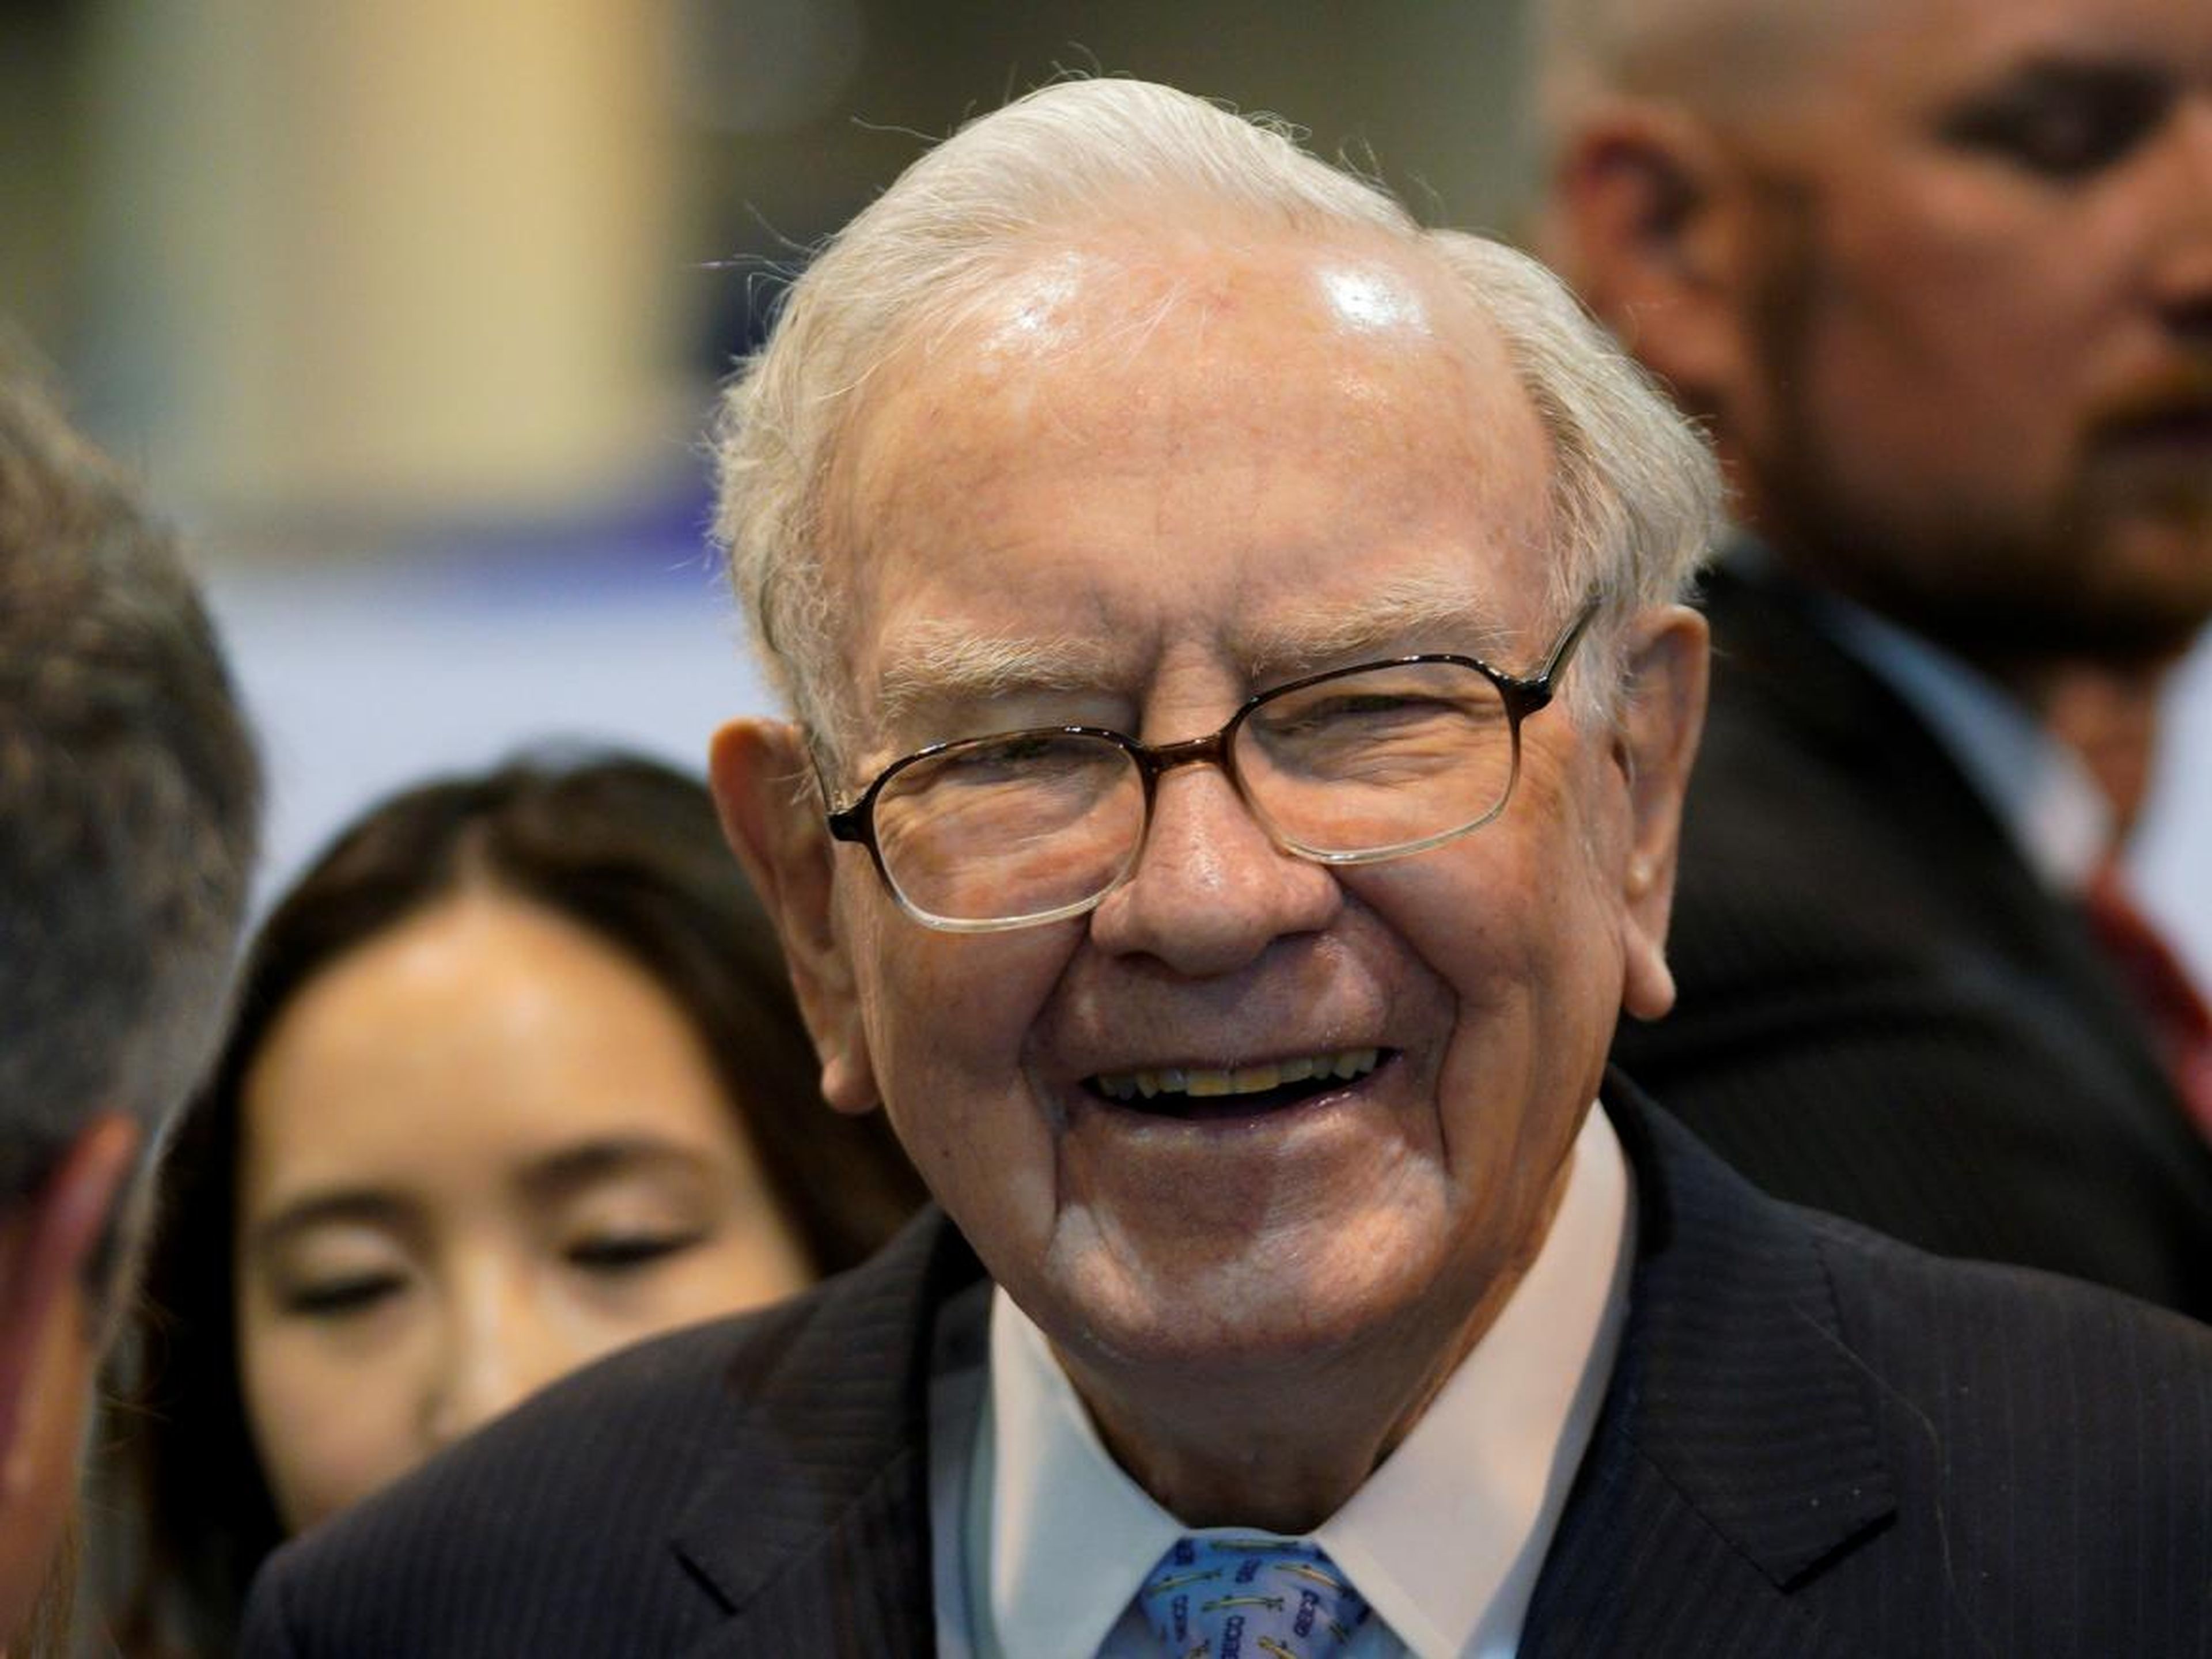 Buffett, through the Susan Thompson Buffett foundation, has donated tens of millions to the Planned Parenthood Federation of America and the National Abortion Federation.